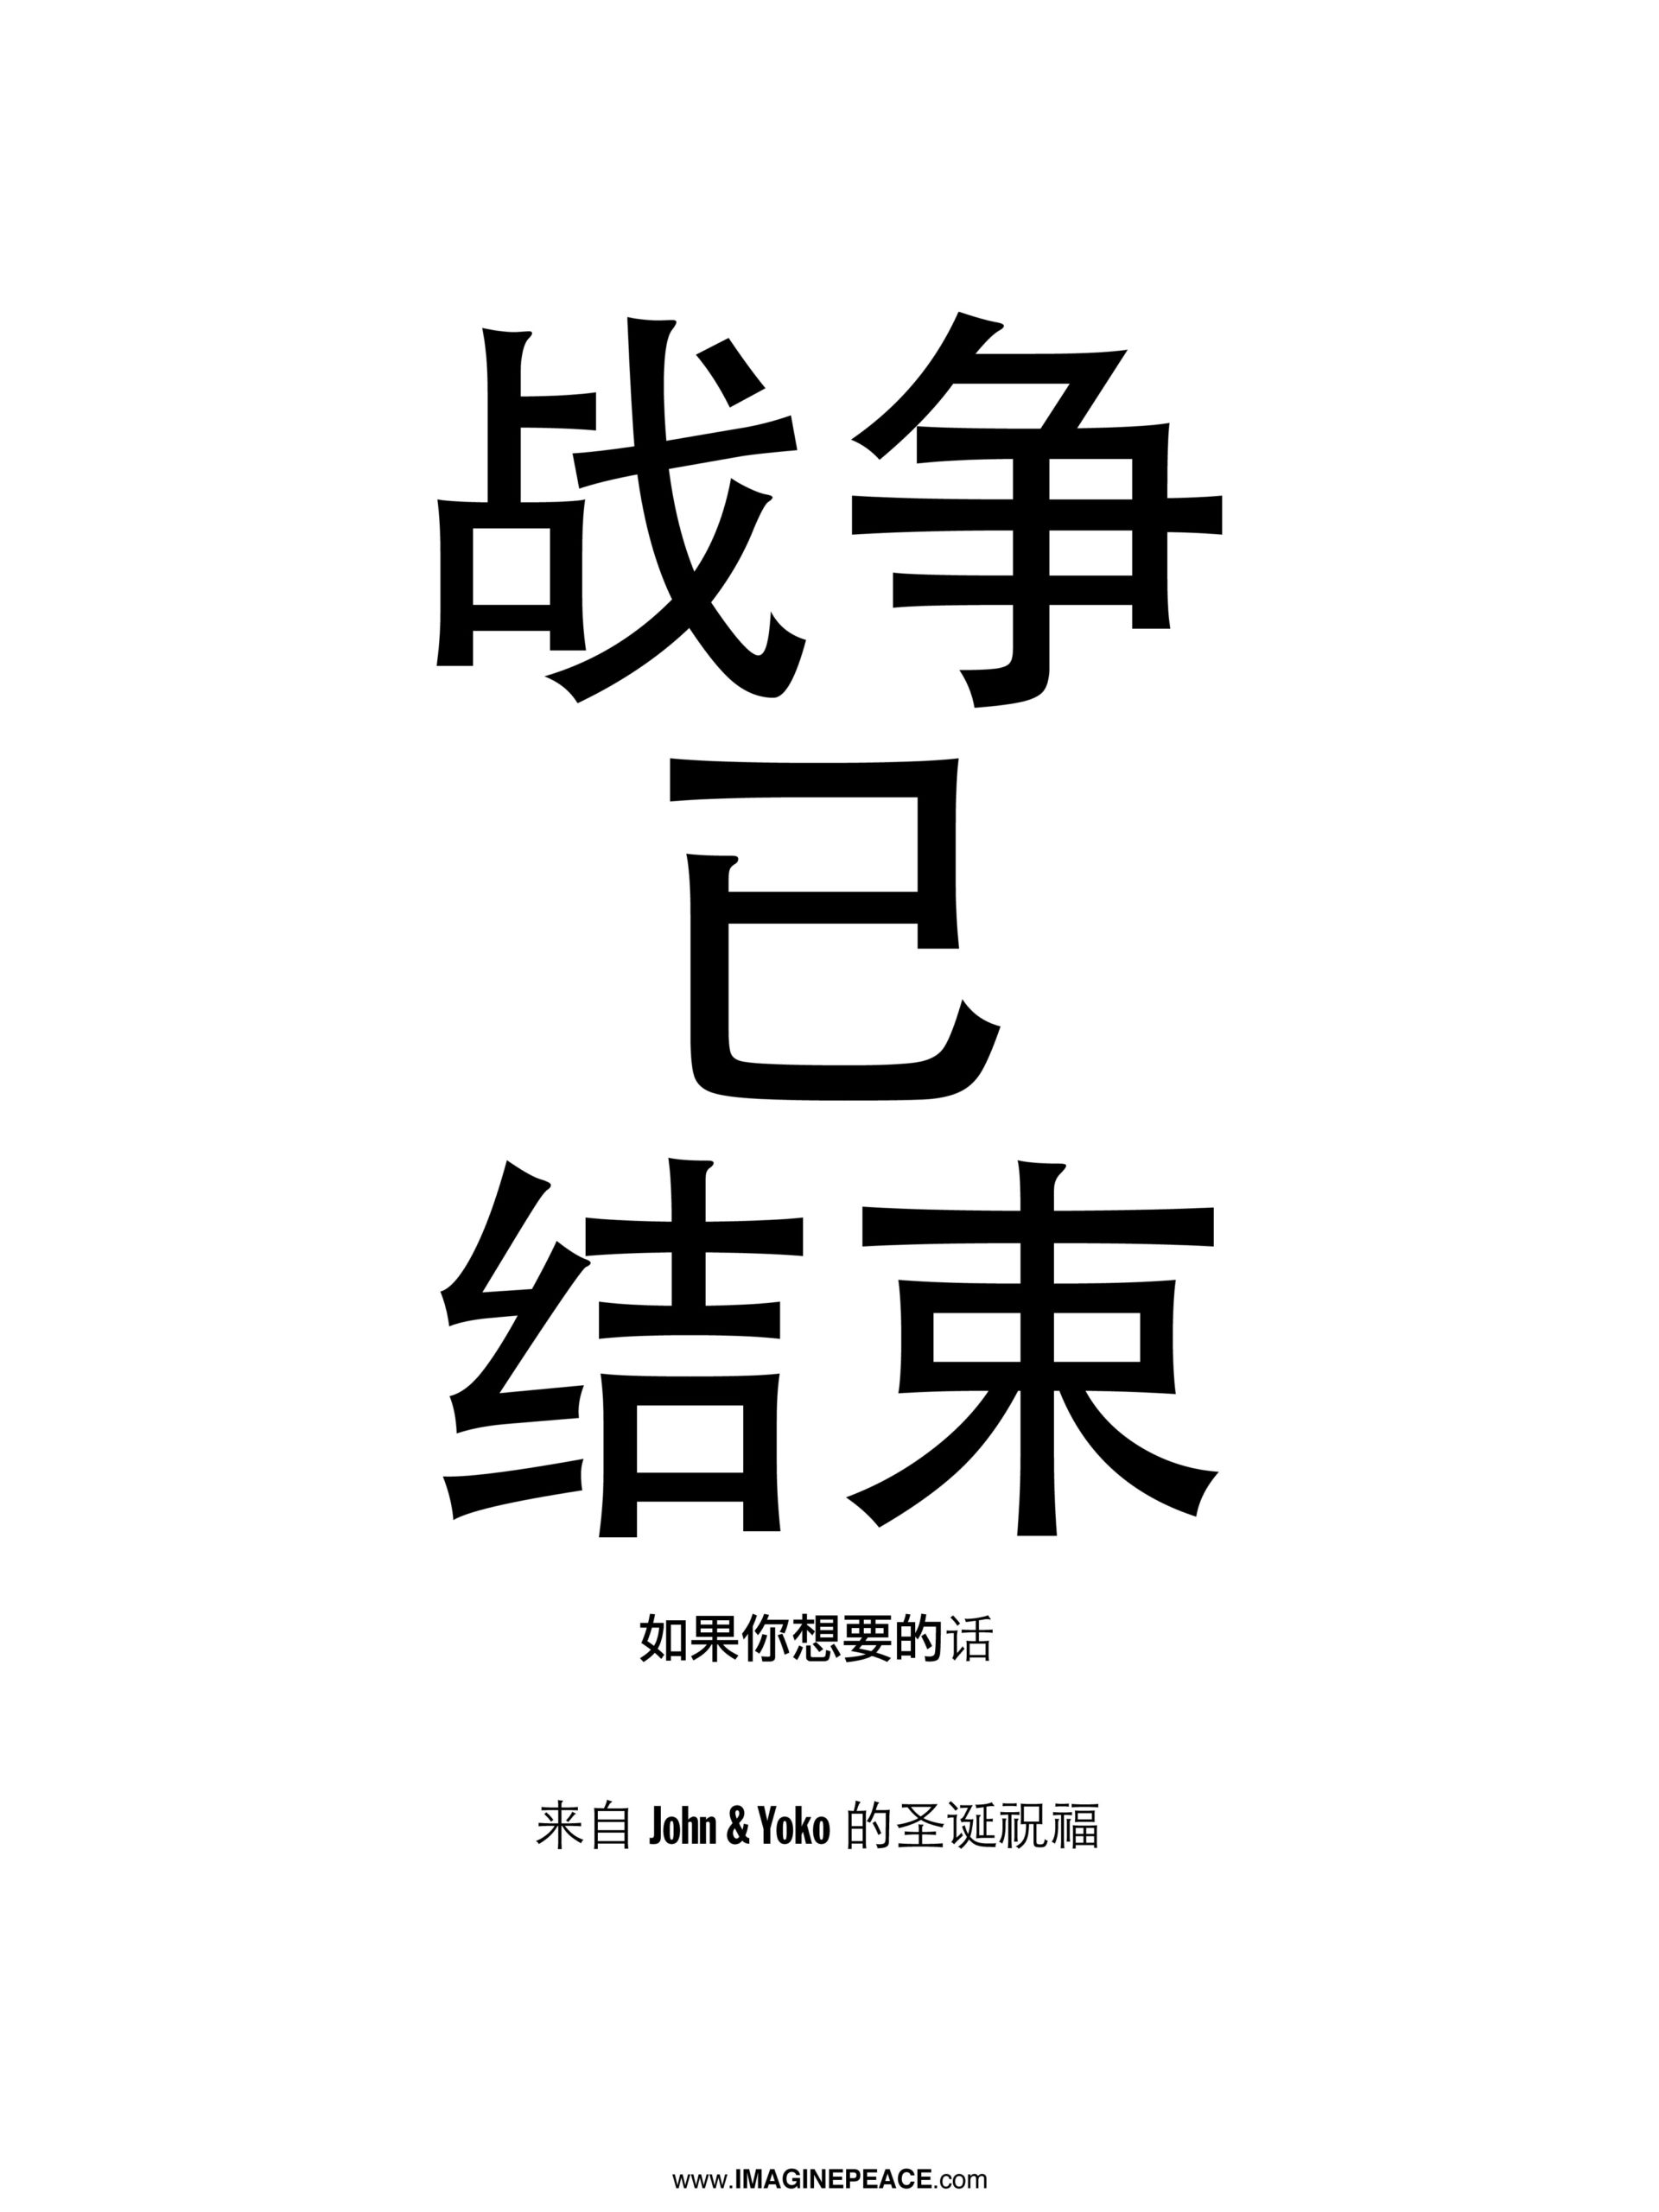 https://publicdelivery.org/wp-content/uploads/2021/06/War-is-Over-poster-in-Simplified-Chinese-scaled.jpg